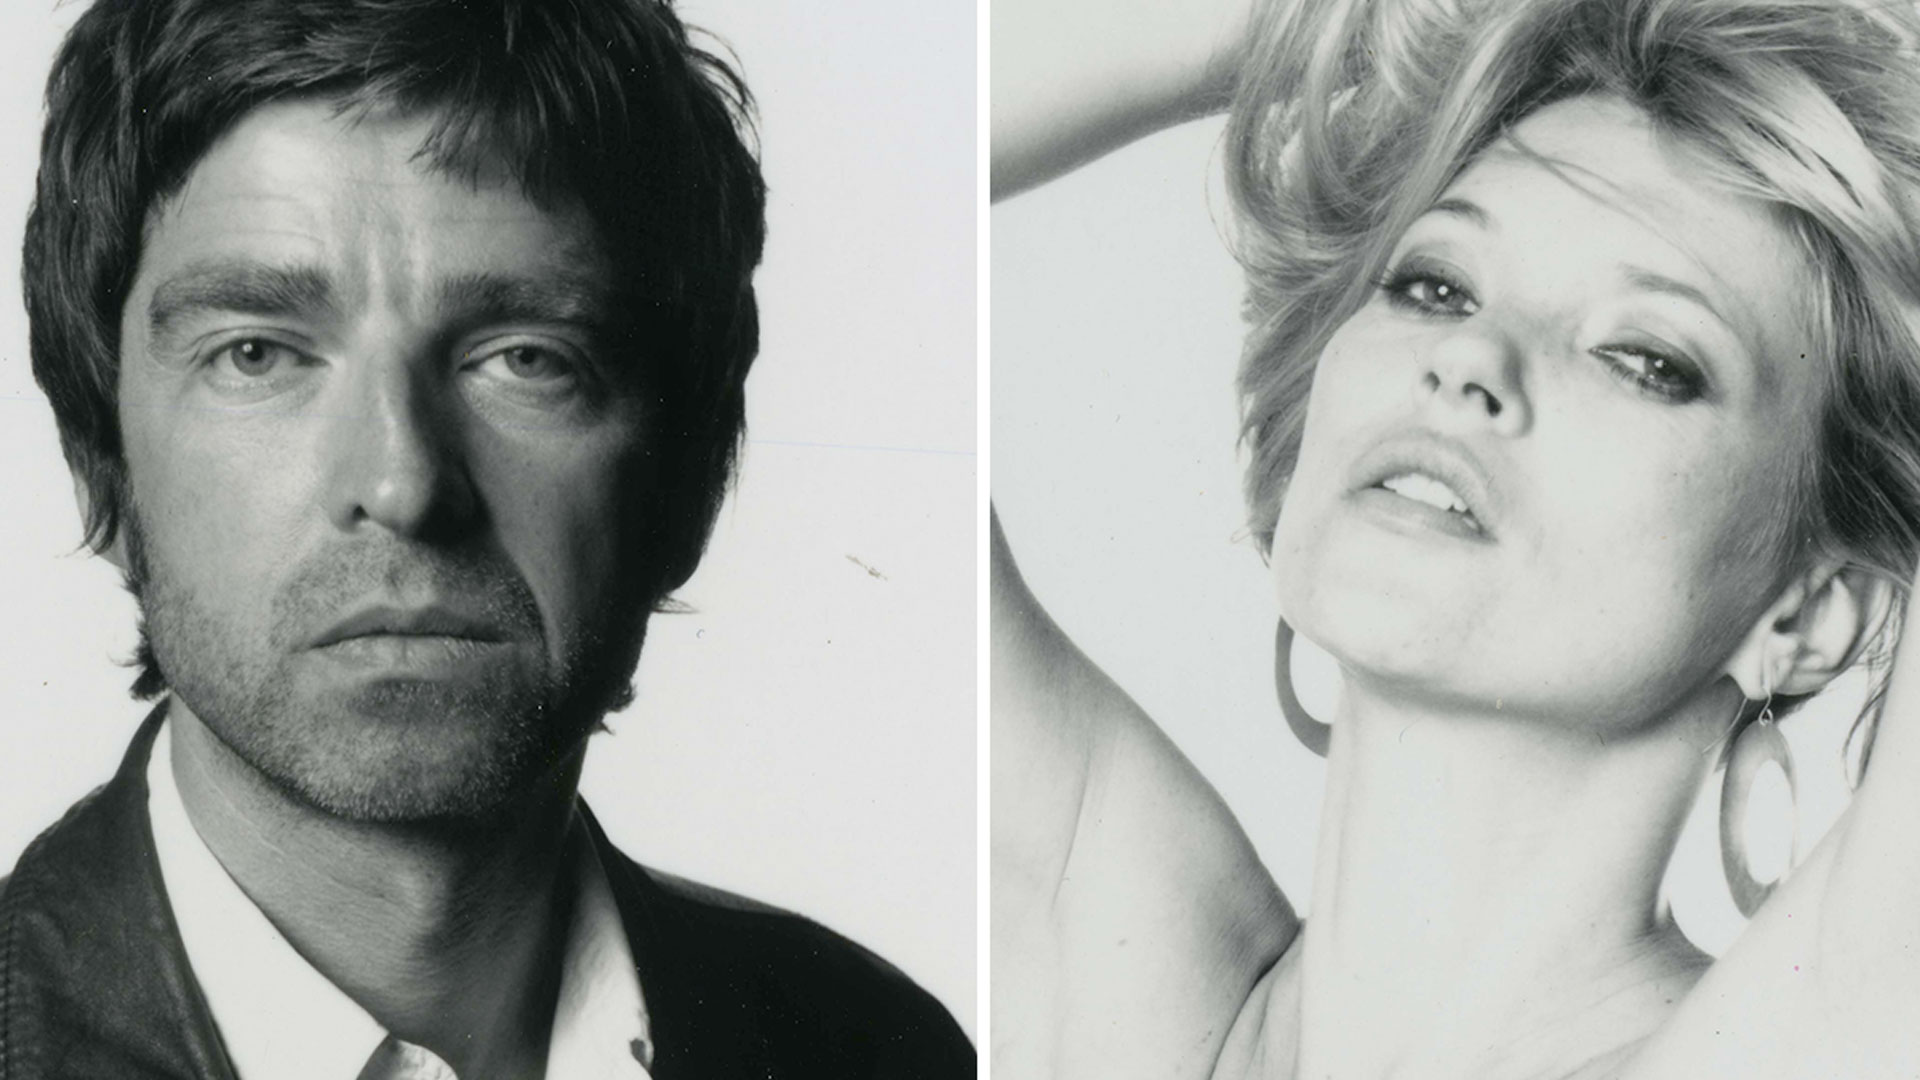 In a lucky-dip sale, Polaroids of Brit icons Noel Gallagher or Kate Moss are up for grabs